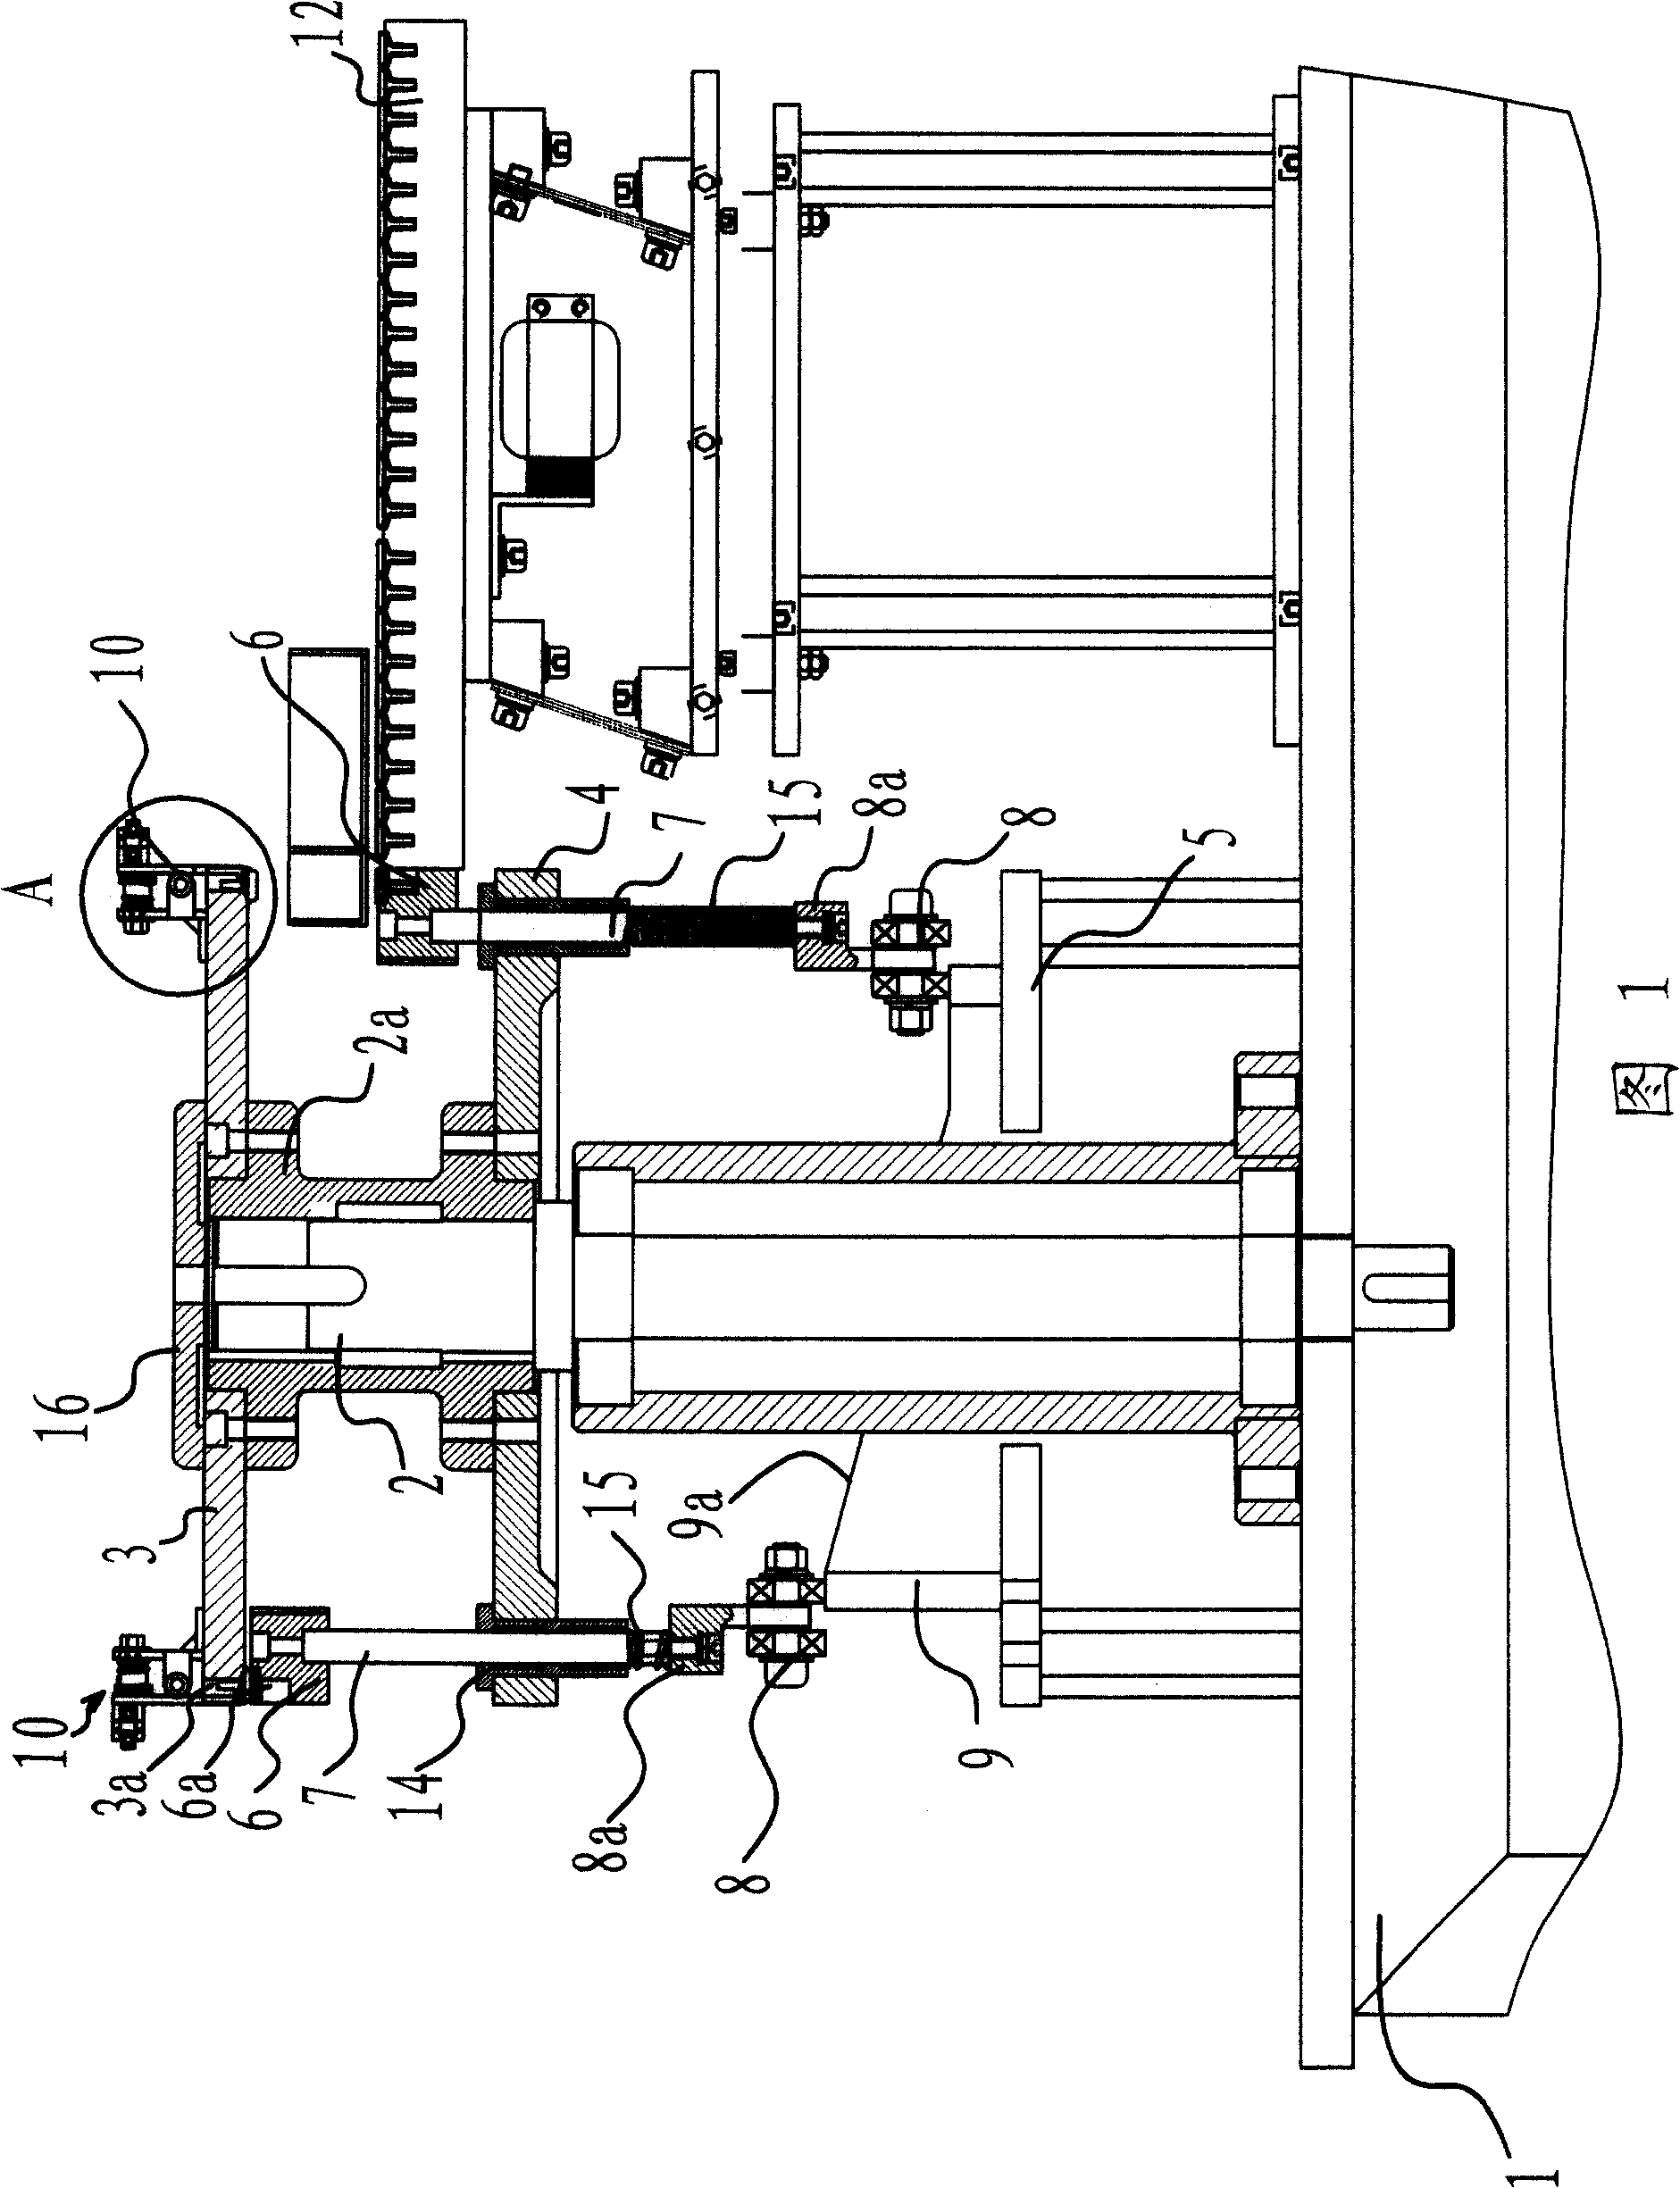 Mounting device for transfusion filter assembling machine